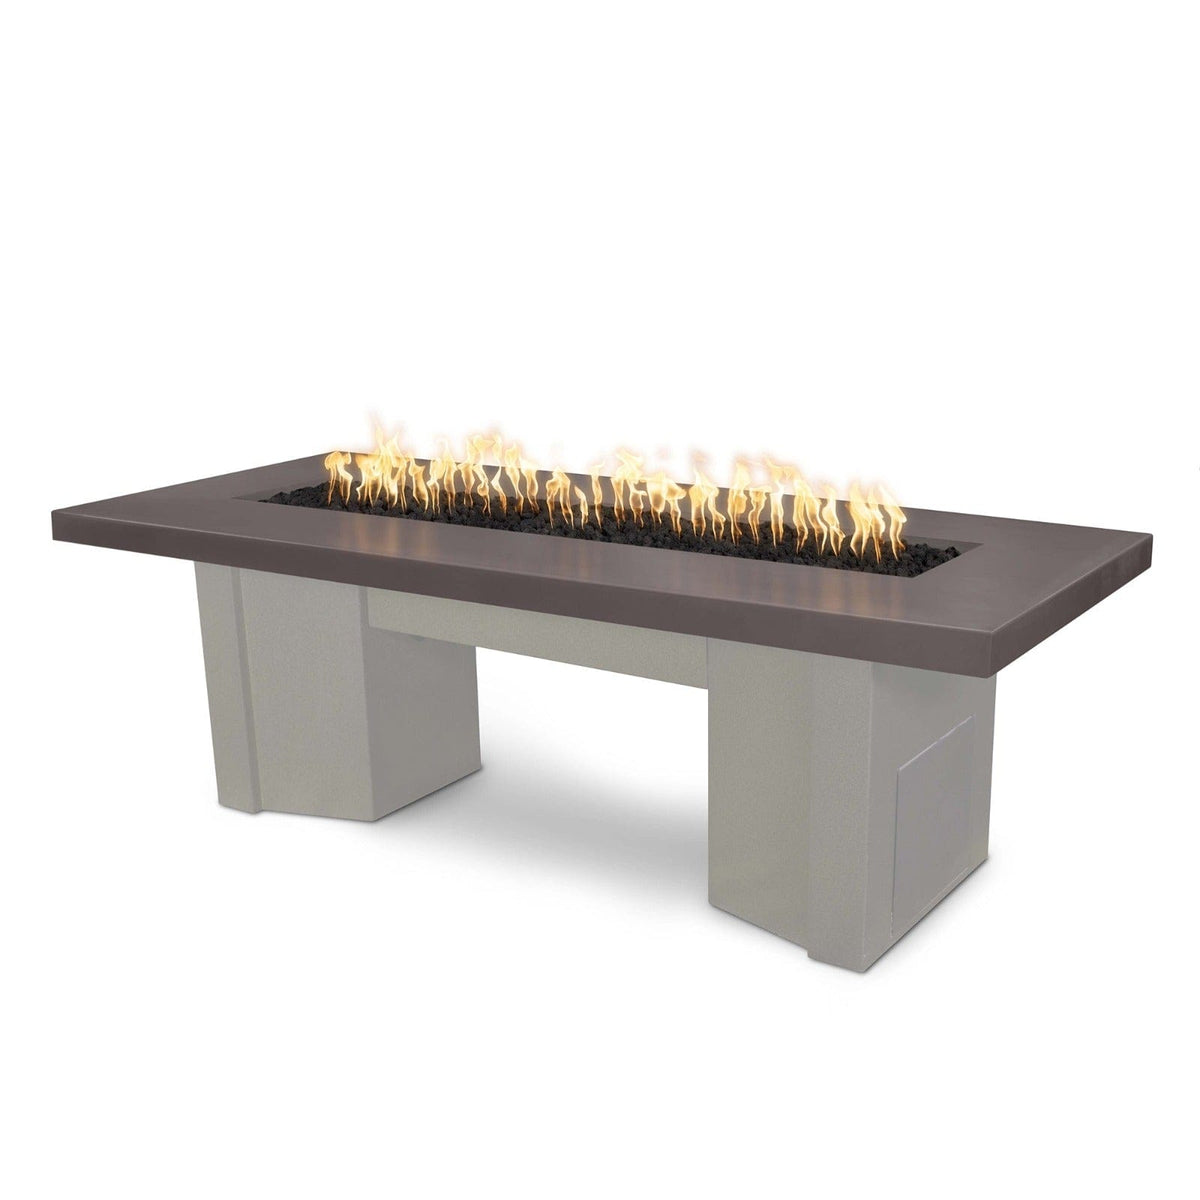 The Outdoor Plus Fire Features Chestnut (-CST) / Pewter Powder Coated Steel (-PEW) The Outdoor Plus 60&quot; Alameda Fire Table Smooth Concrete in Natural Gas - Flame Sense System with Push Button Spark Igniter / OPT-ALMGFRC60FSEN-NG